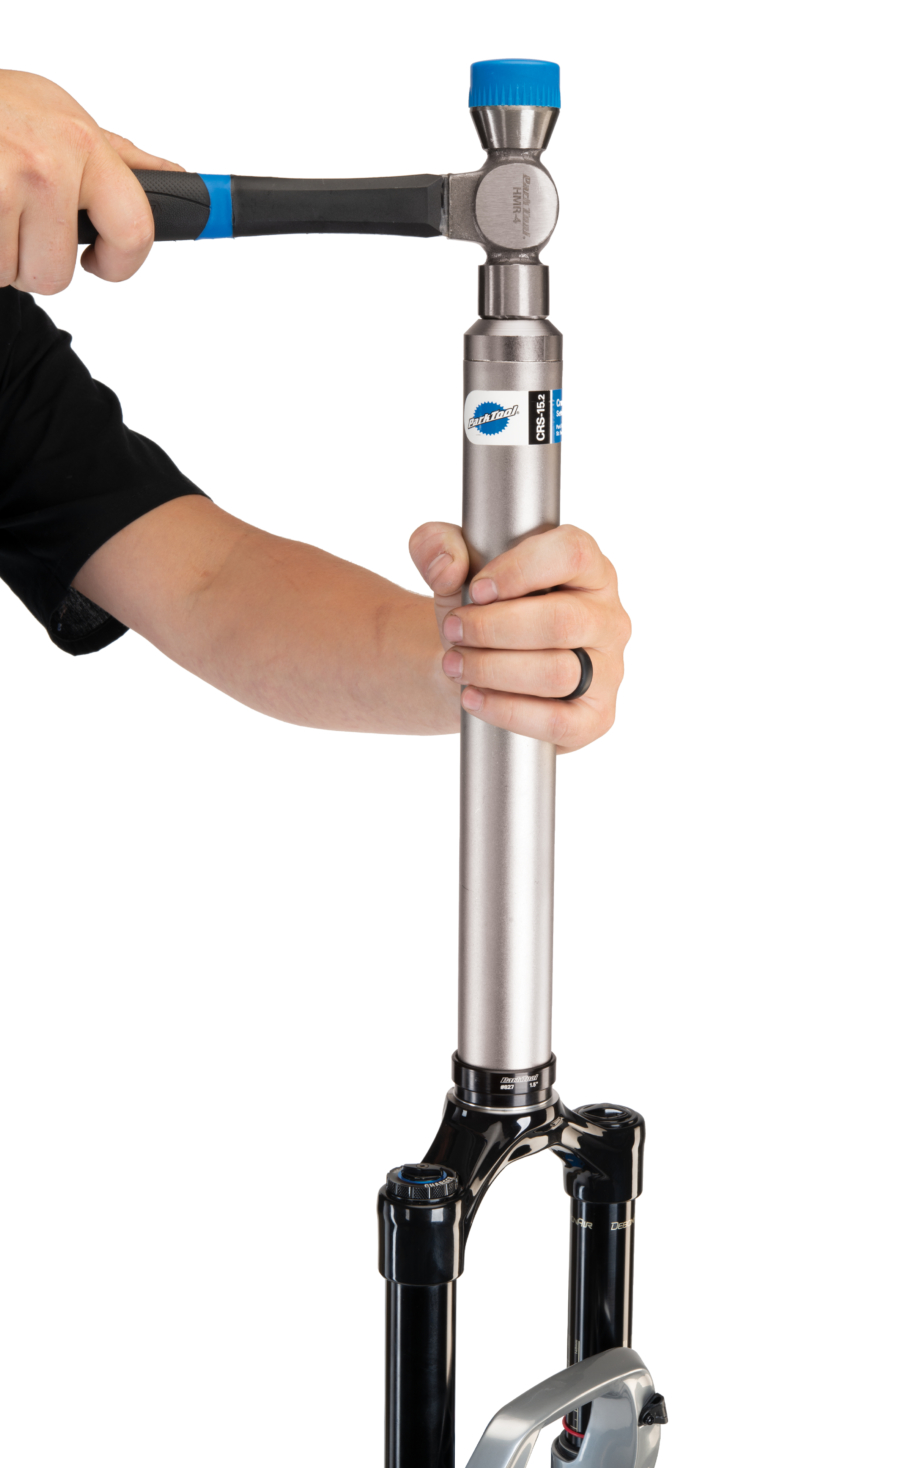 The Park Tool CRS-15.2 Crown Race Setting System installing crown race on steering tube of suspension fork, enlarged